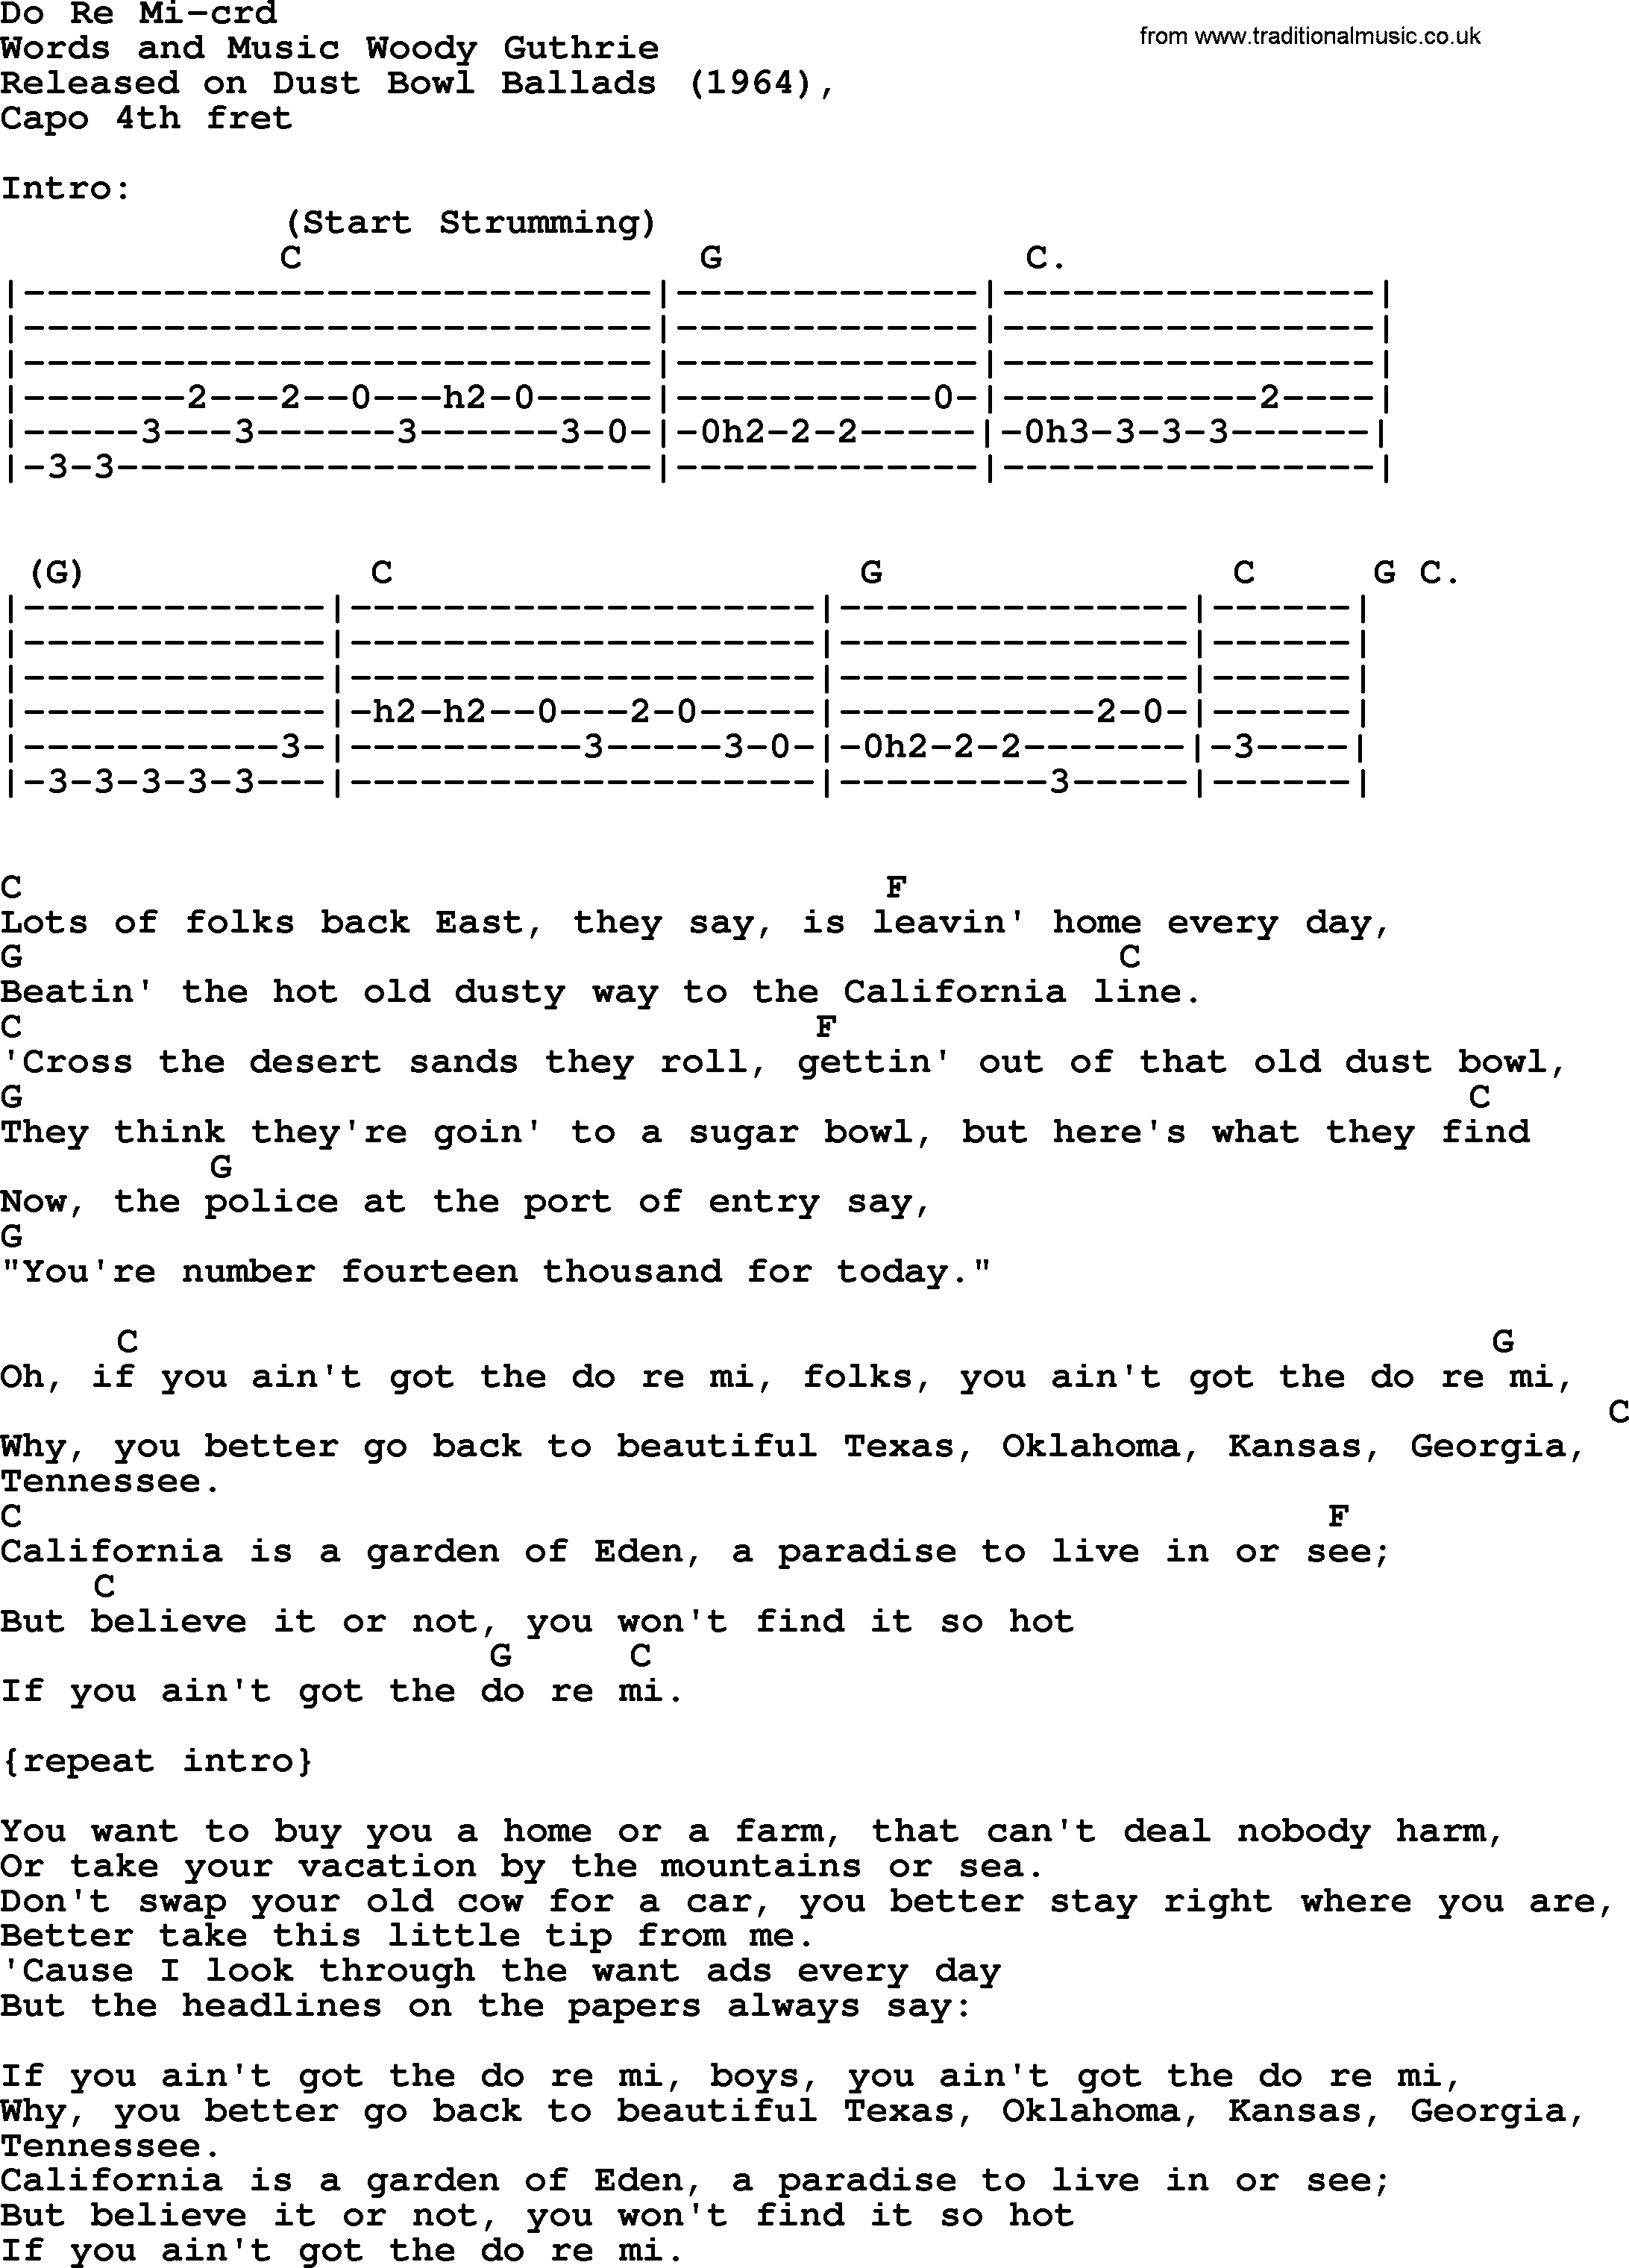 Woody Guthrie song Do Re Mi lyrics and chords